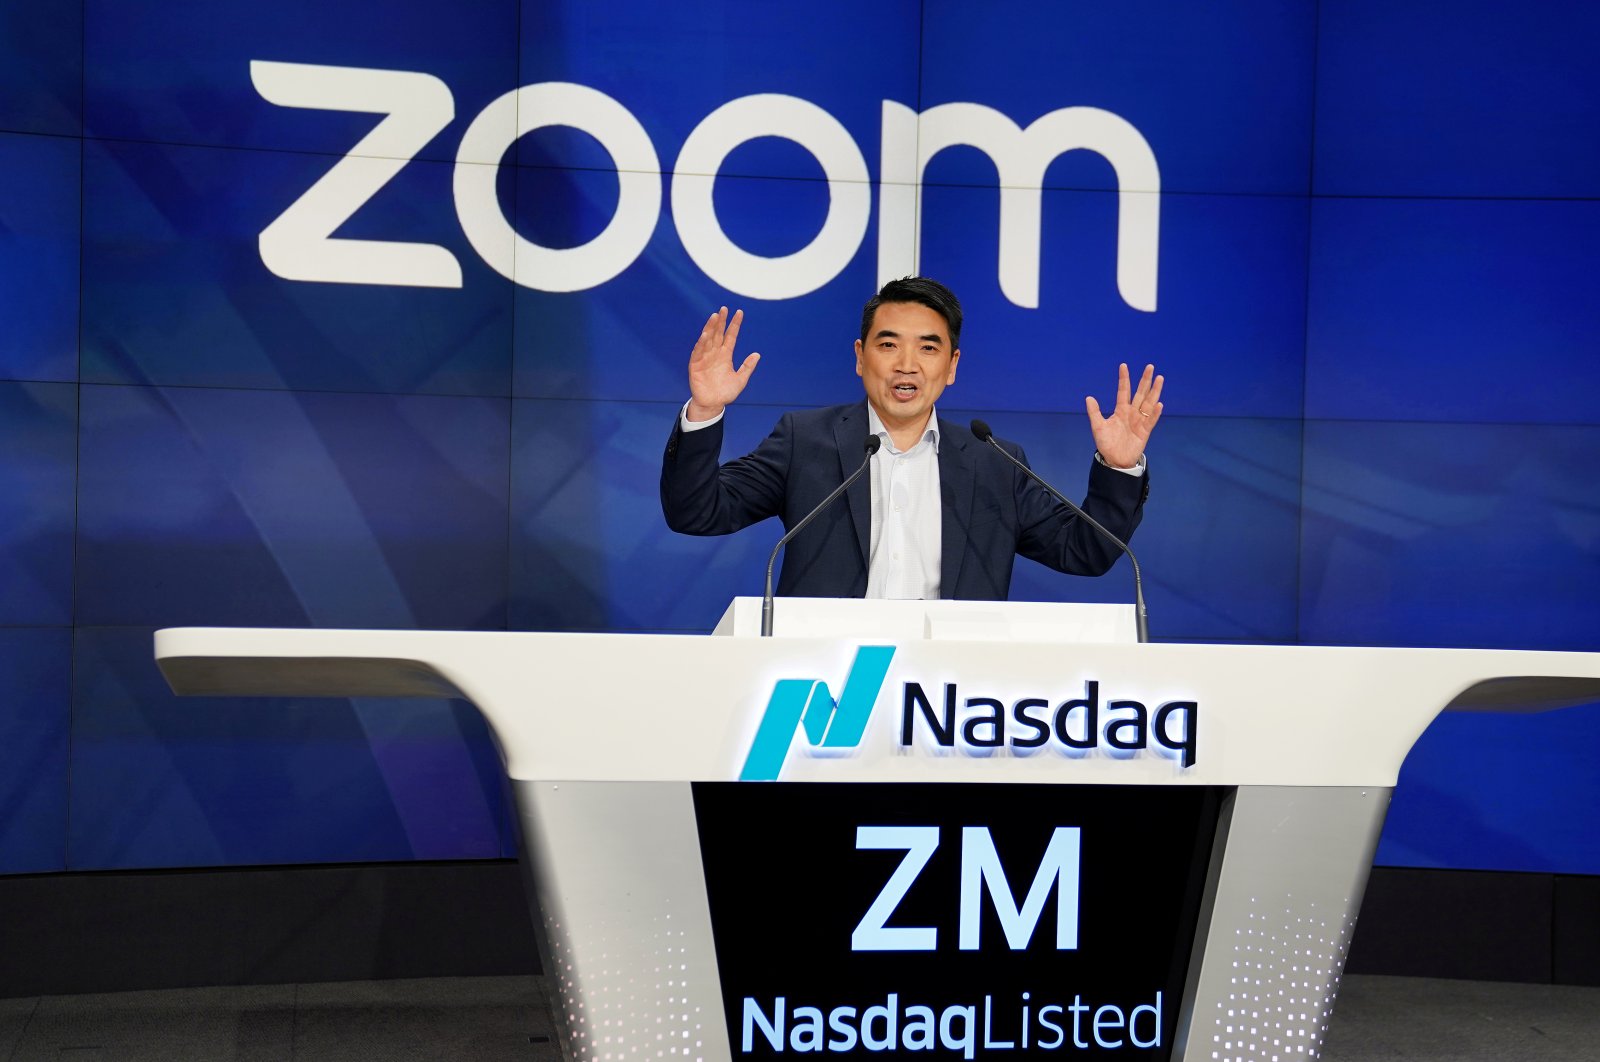 Eric Yuan, CEO of Zoom Video Communications takes part in a bell-ringing ceremony at the NASDAQ MarketSite in New York, New York, U.S., April 18, 2019. (Reuters Photo)